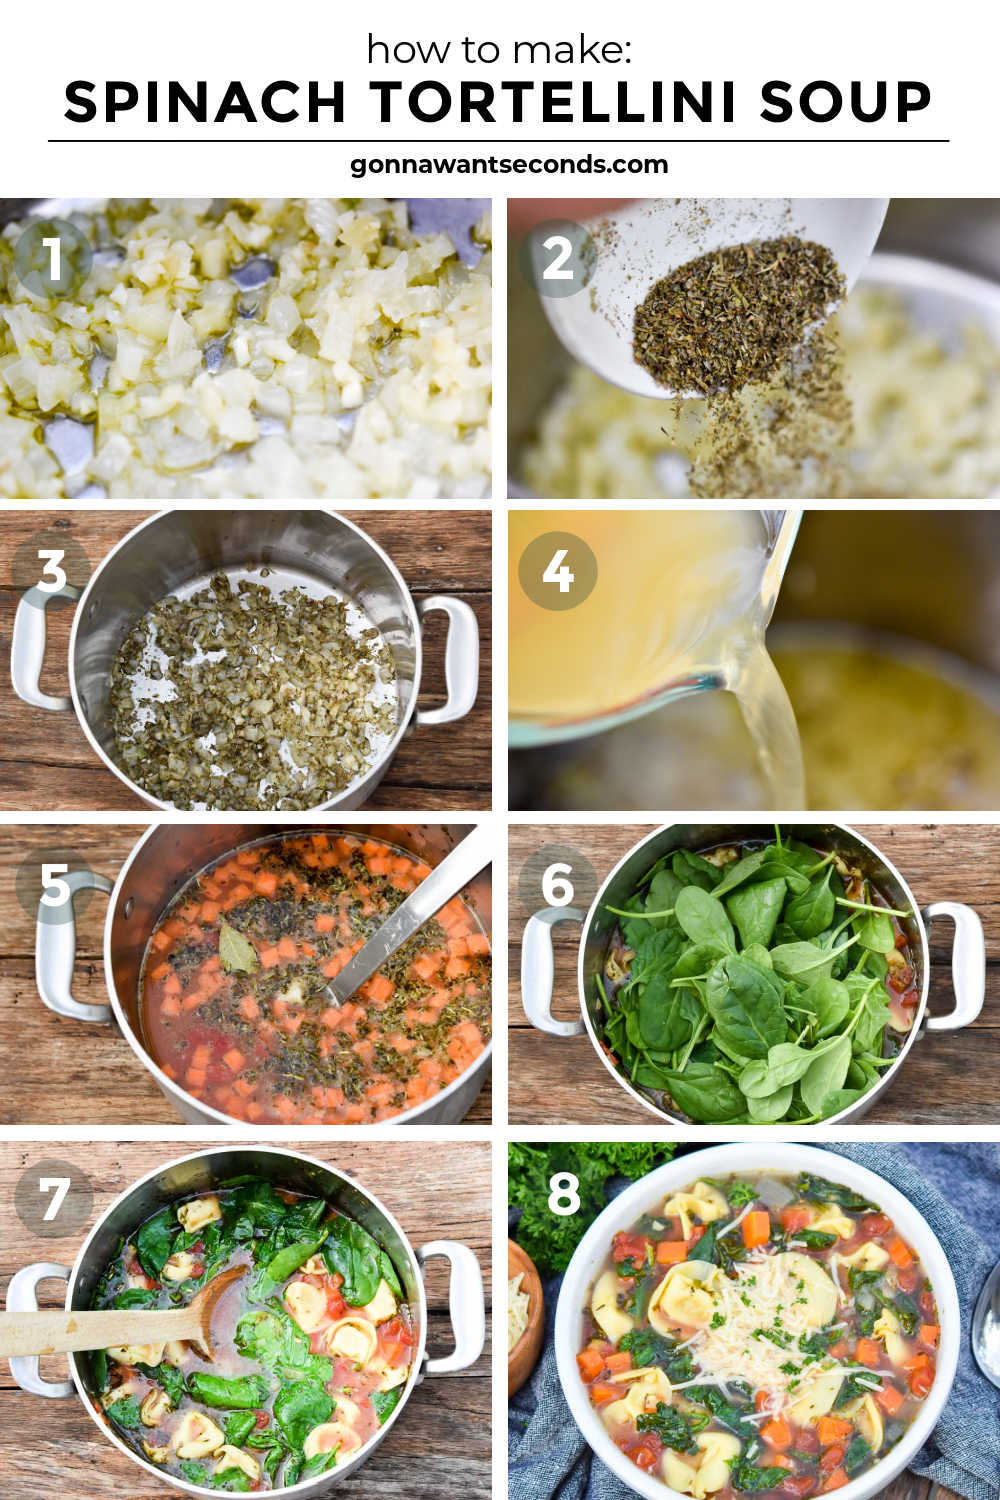 step by step how to make spinach tortellini soup